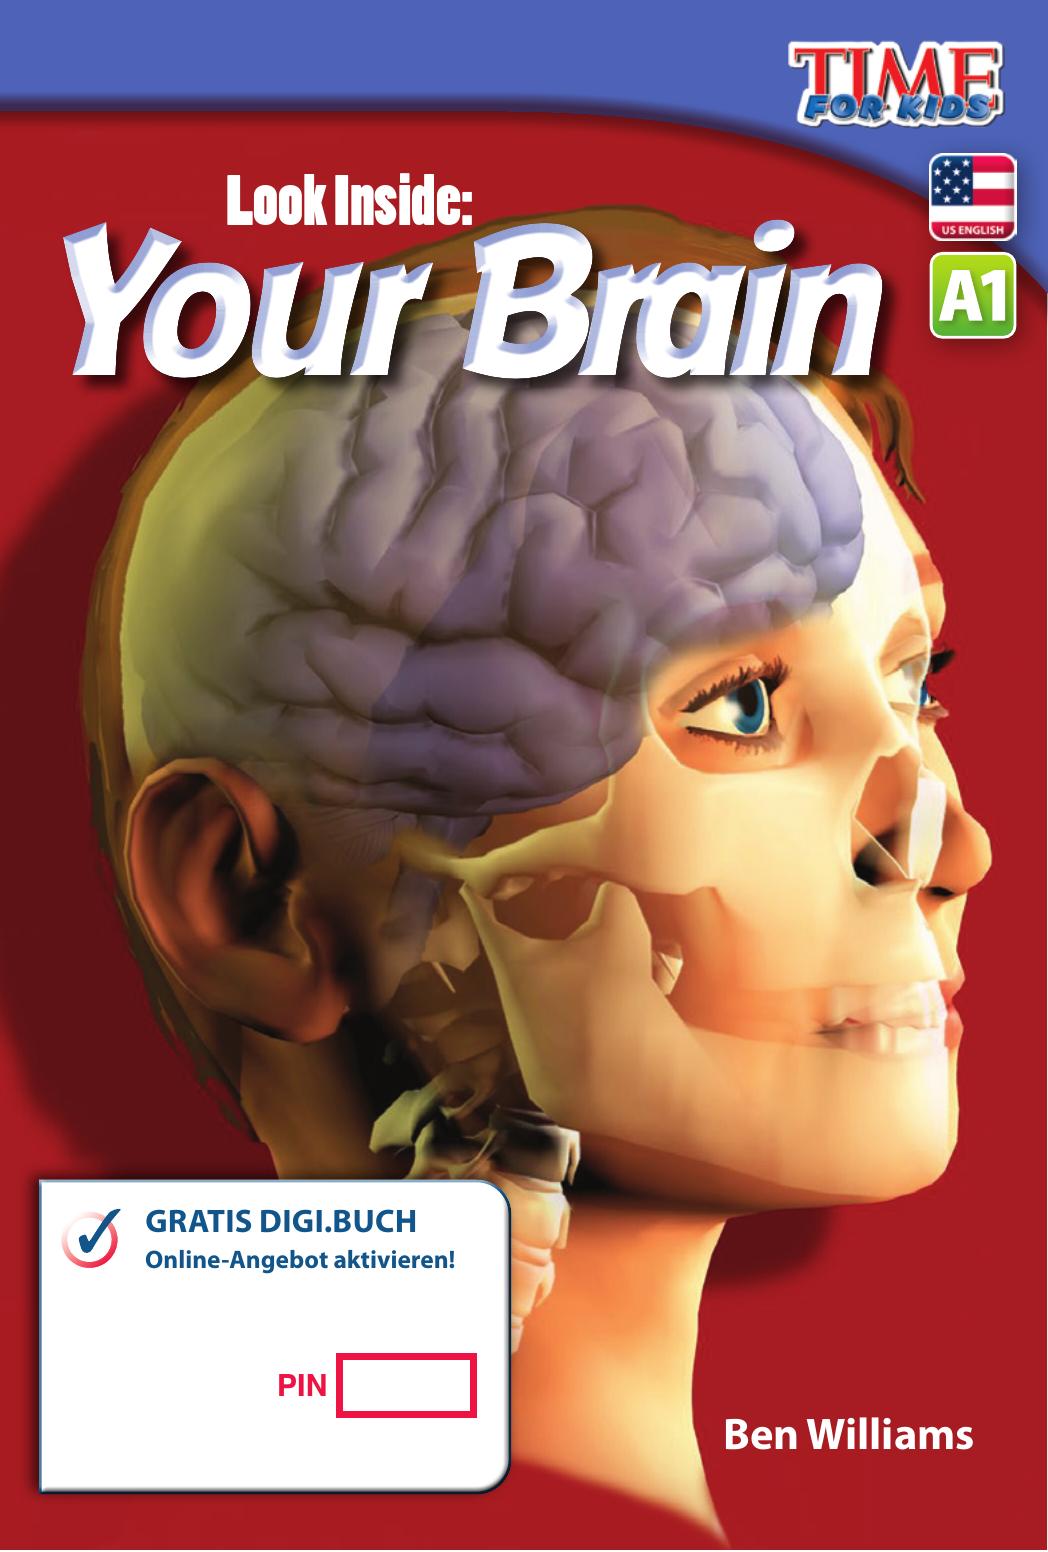 A1 – Look Inside: Your Brain